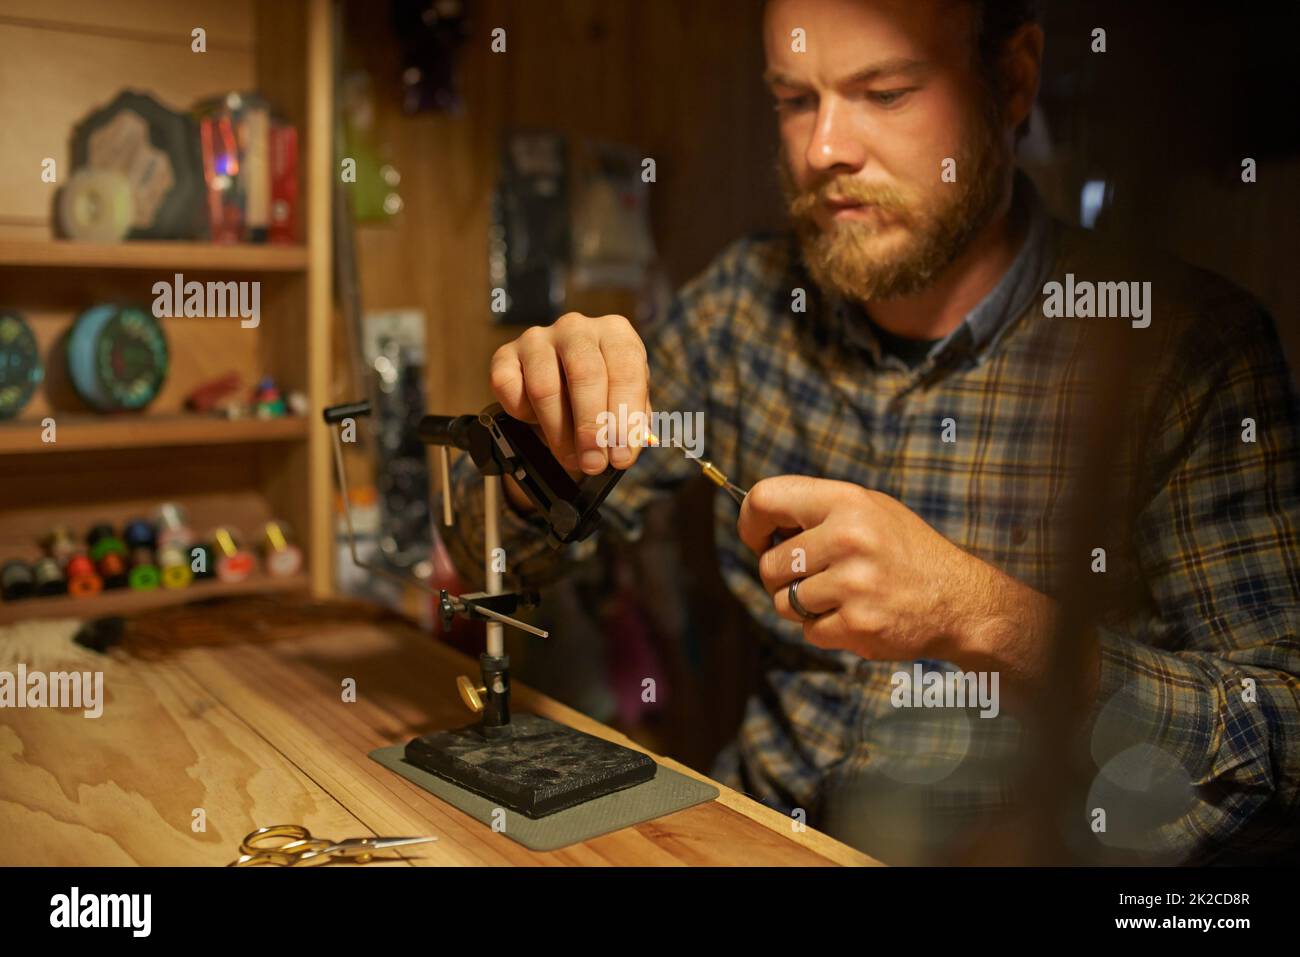 Creating the perfect fishing tackle. Shot of a man making fishing lures in his workshop. Stock Photo